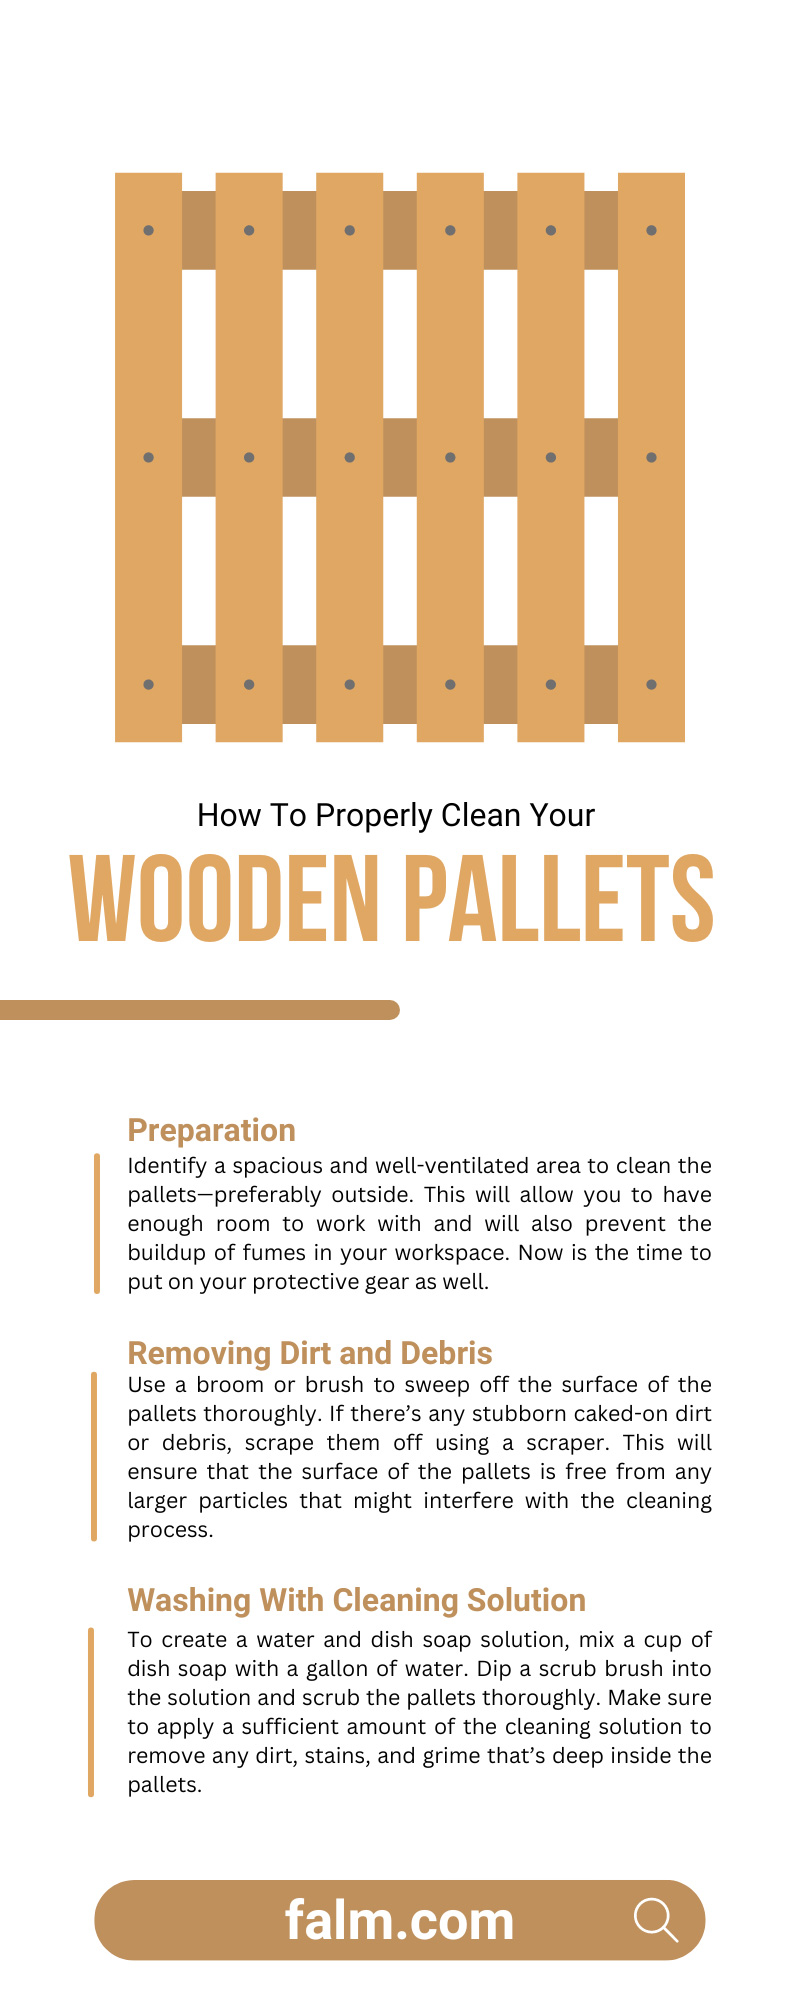 How To Properly Clean Your Wooden Pallets